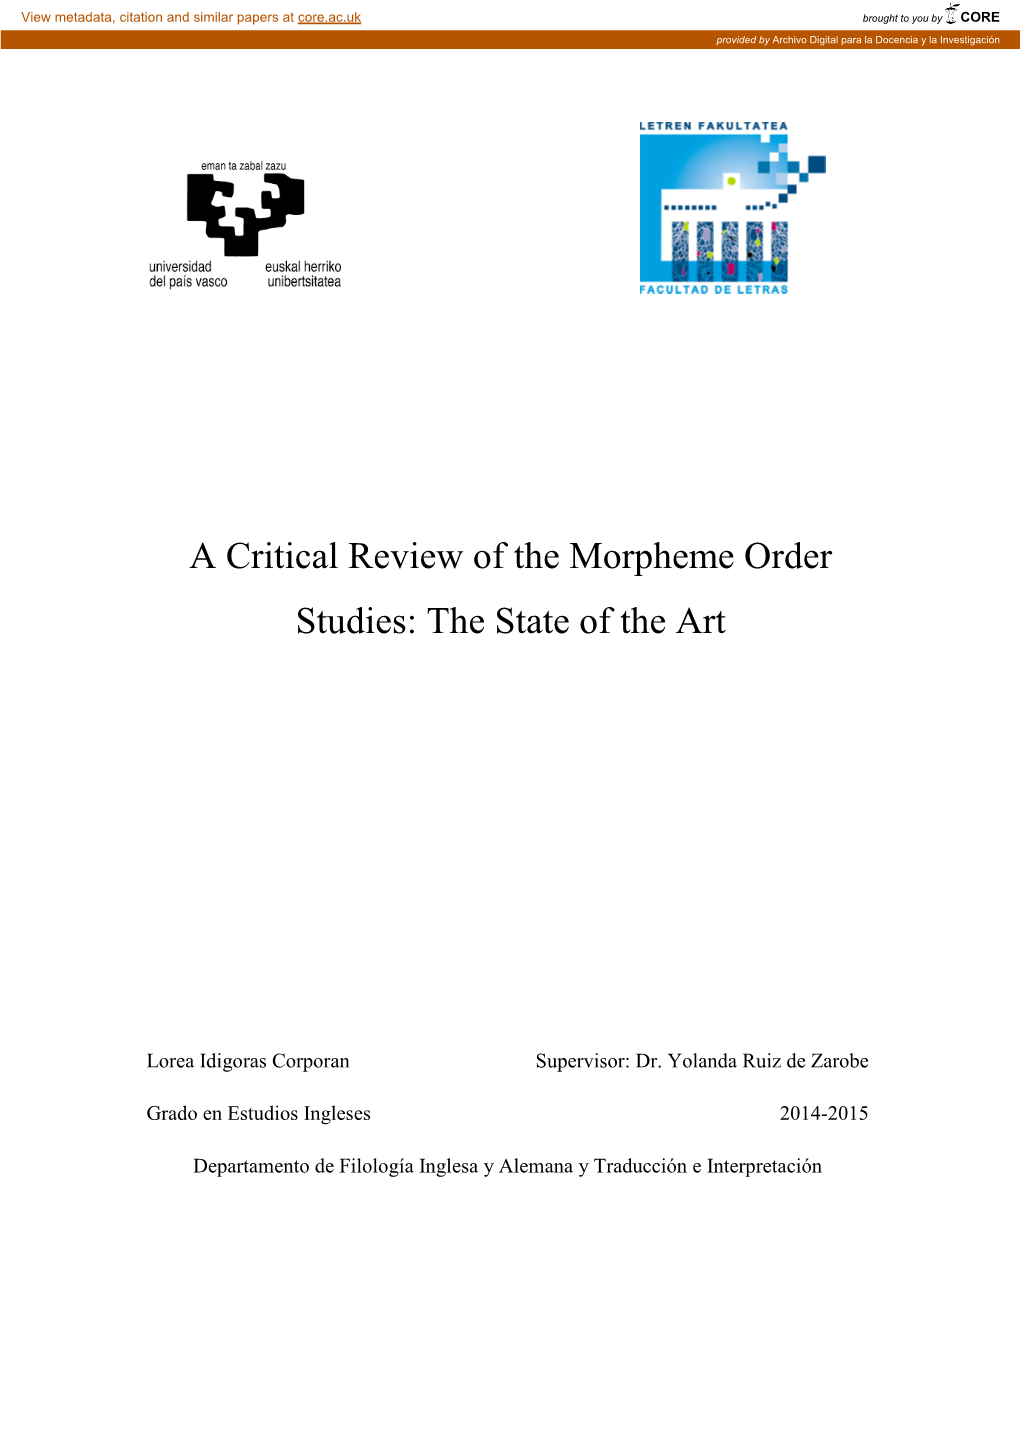 A Critical Review of the Morpheme Order Studies: the State of the Art